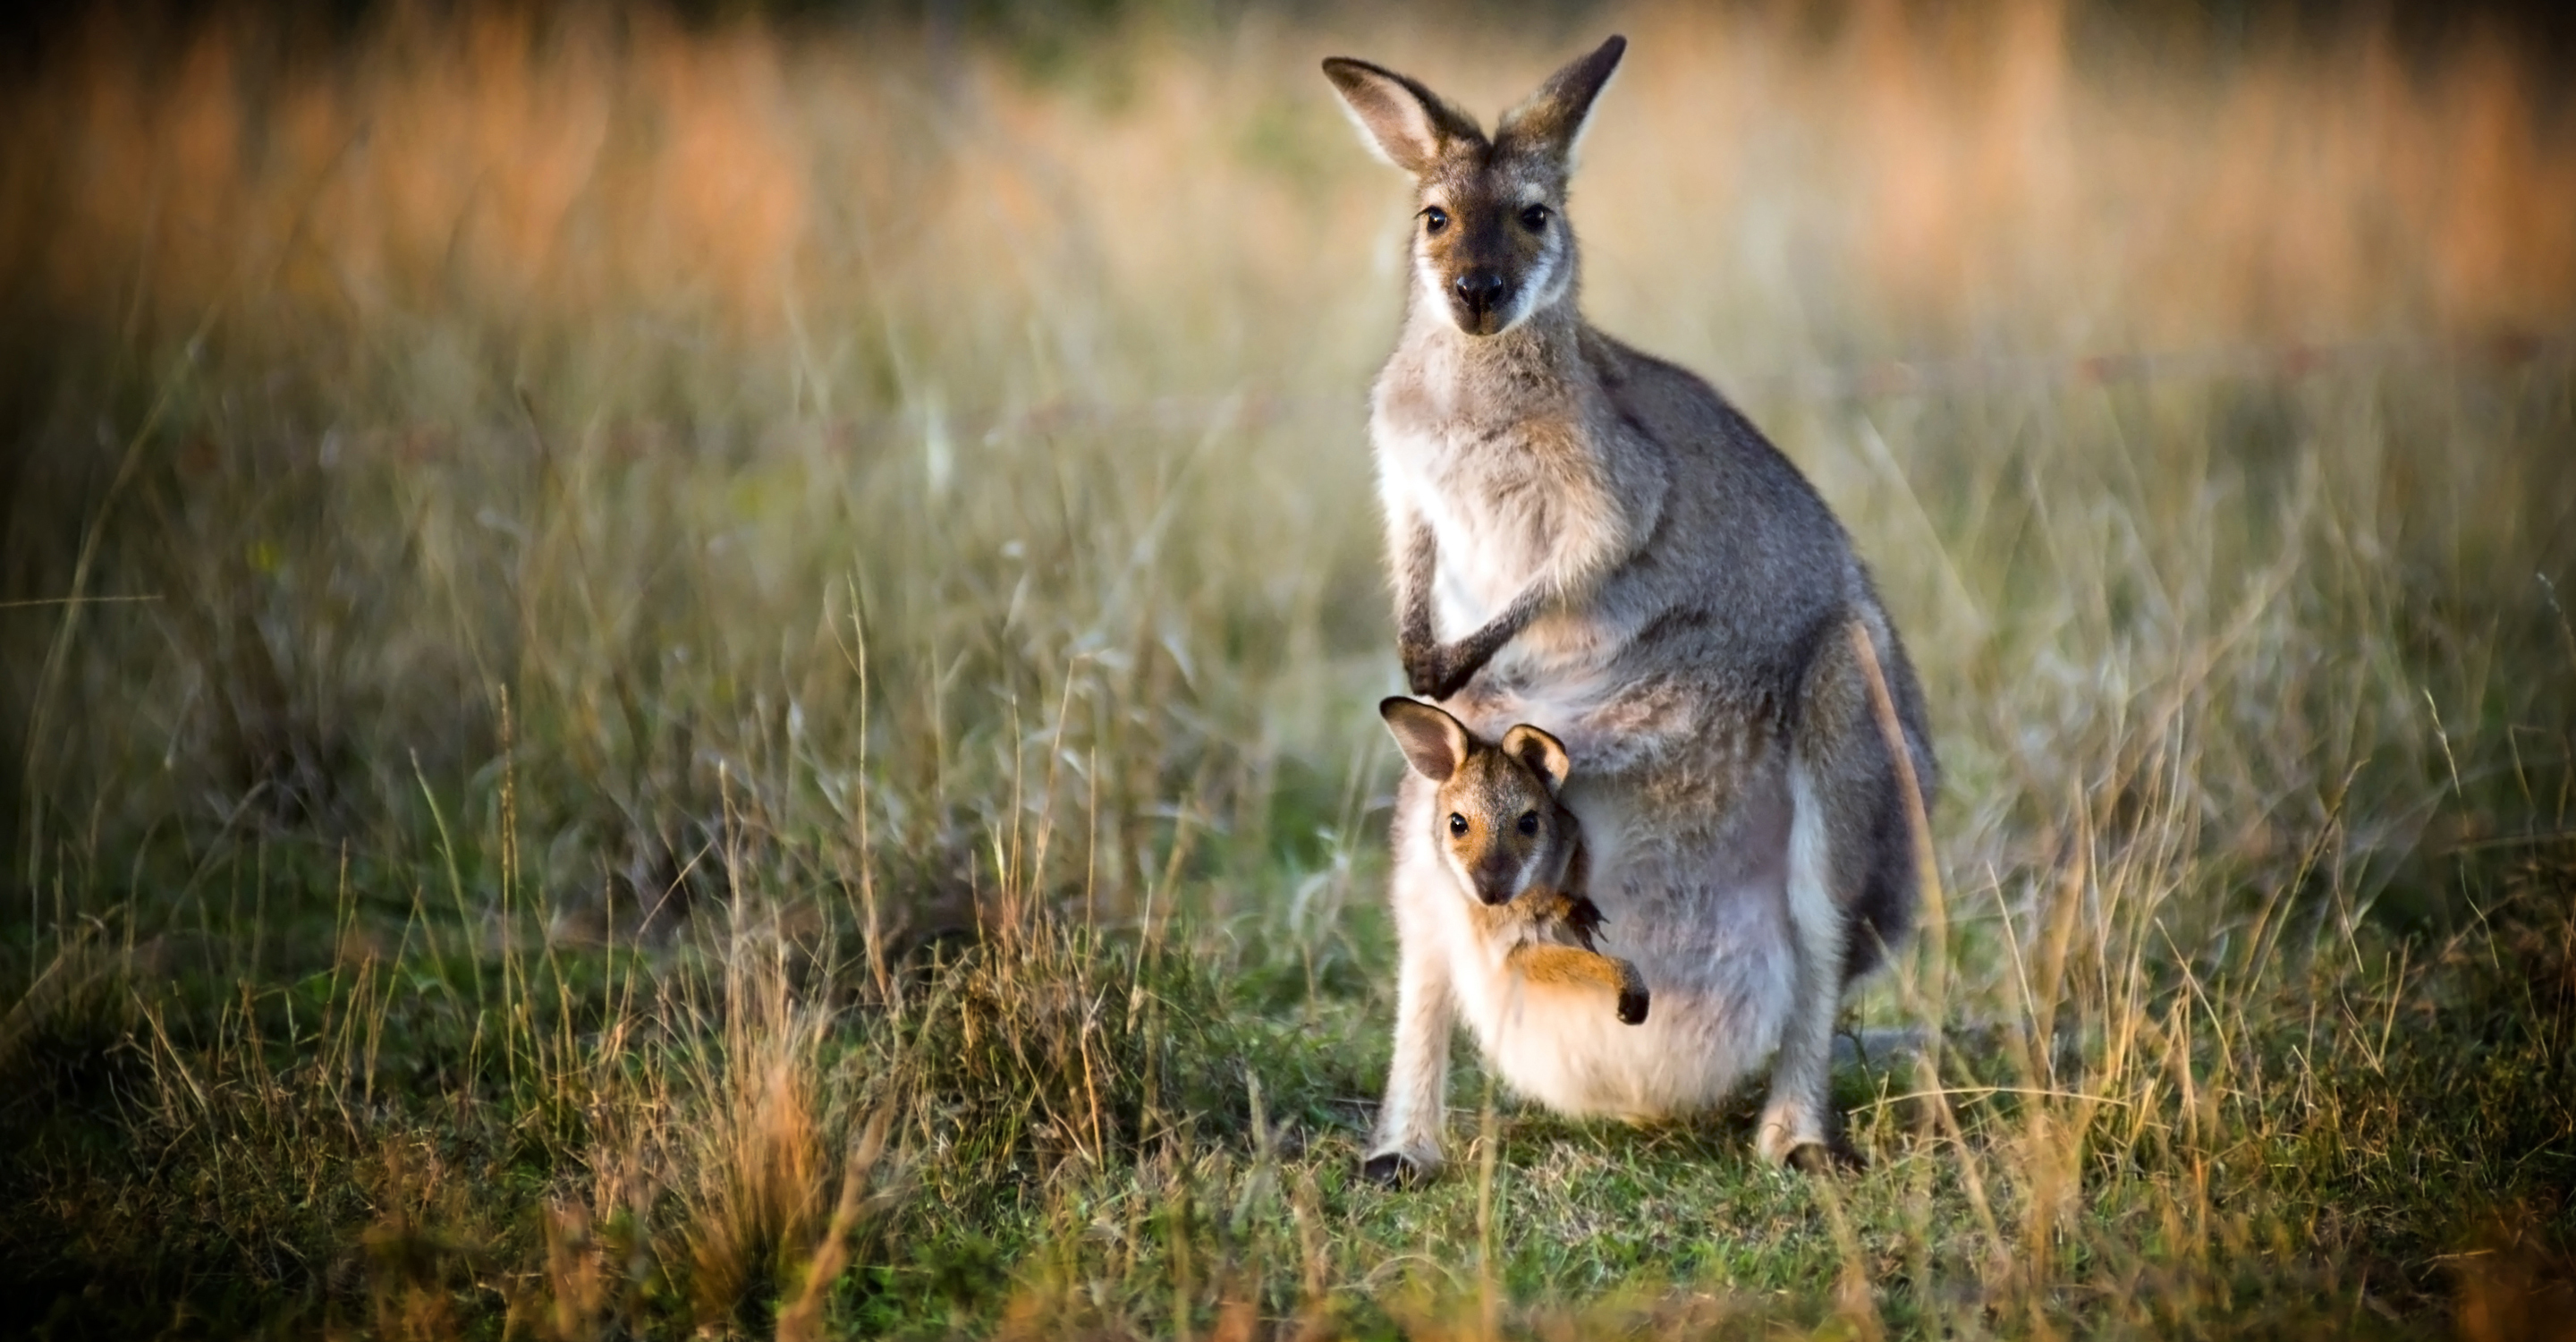 Australian kangaroo with a joey in its pouch at sunset, Australia